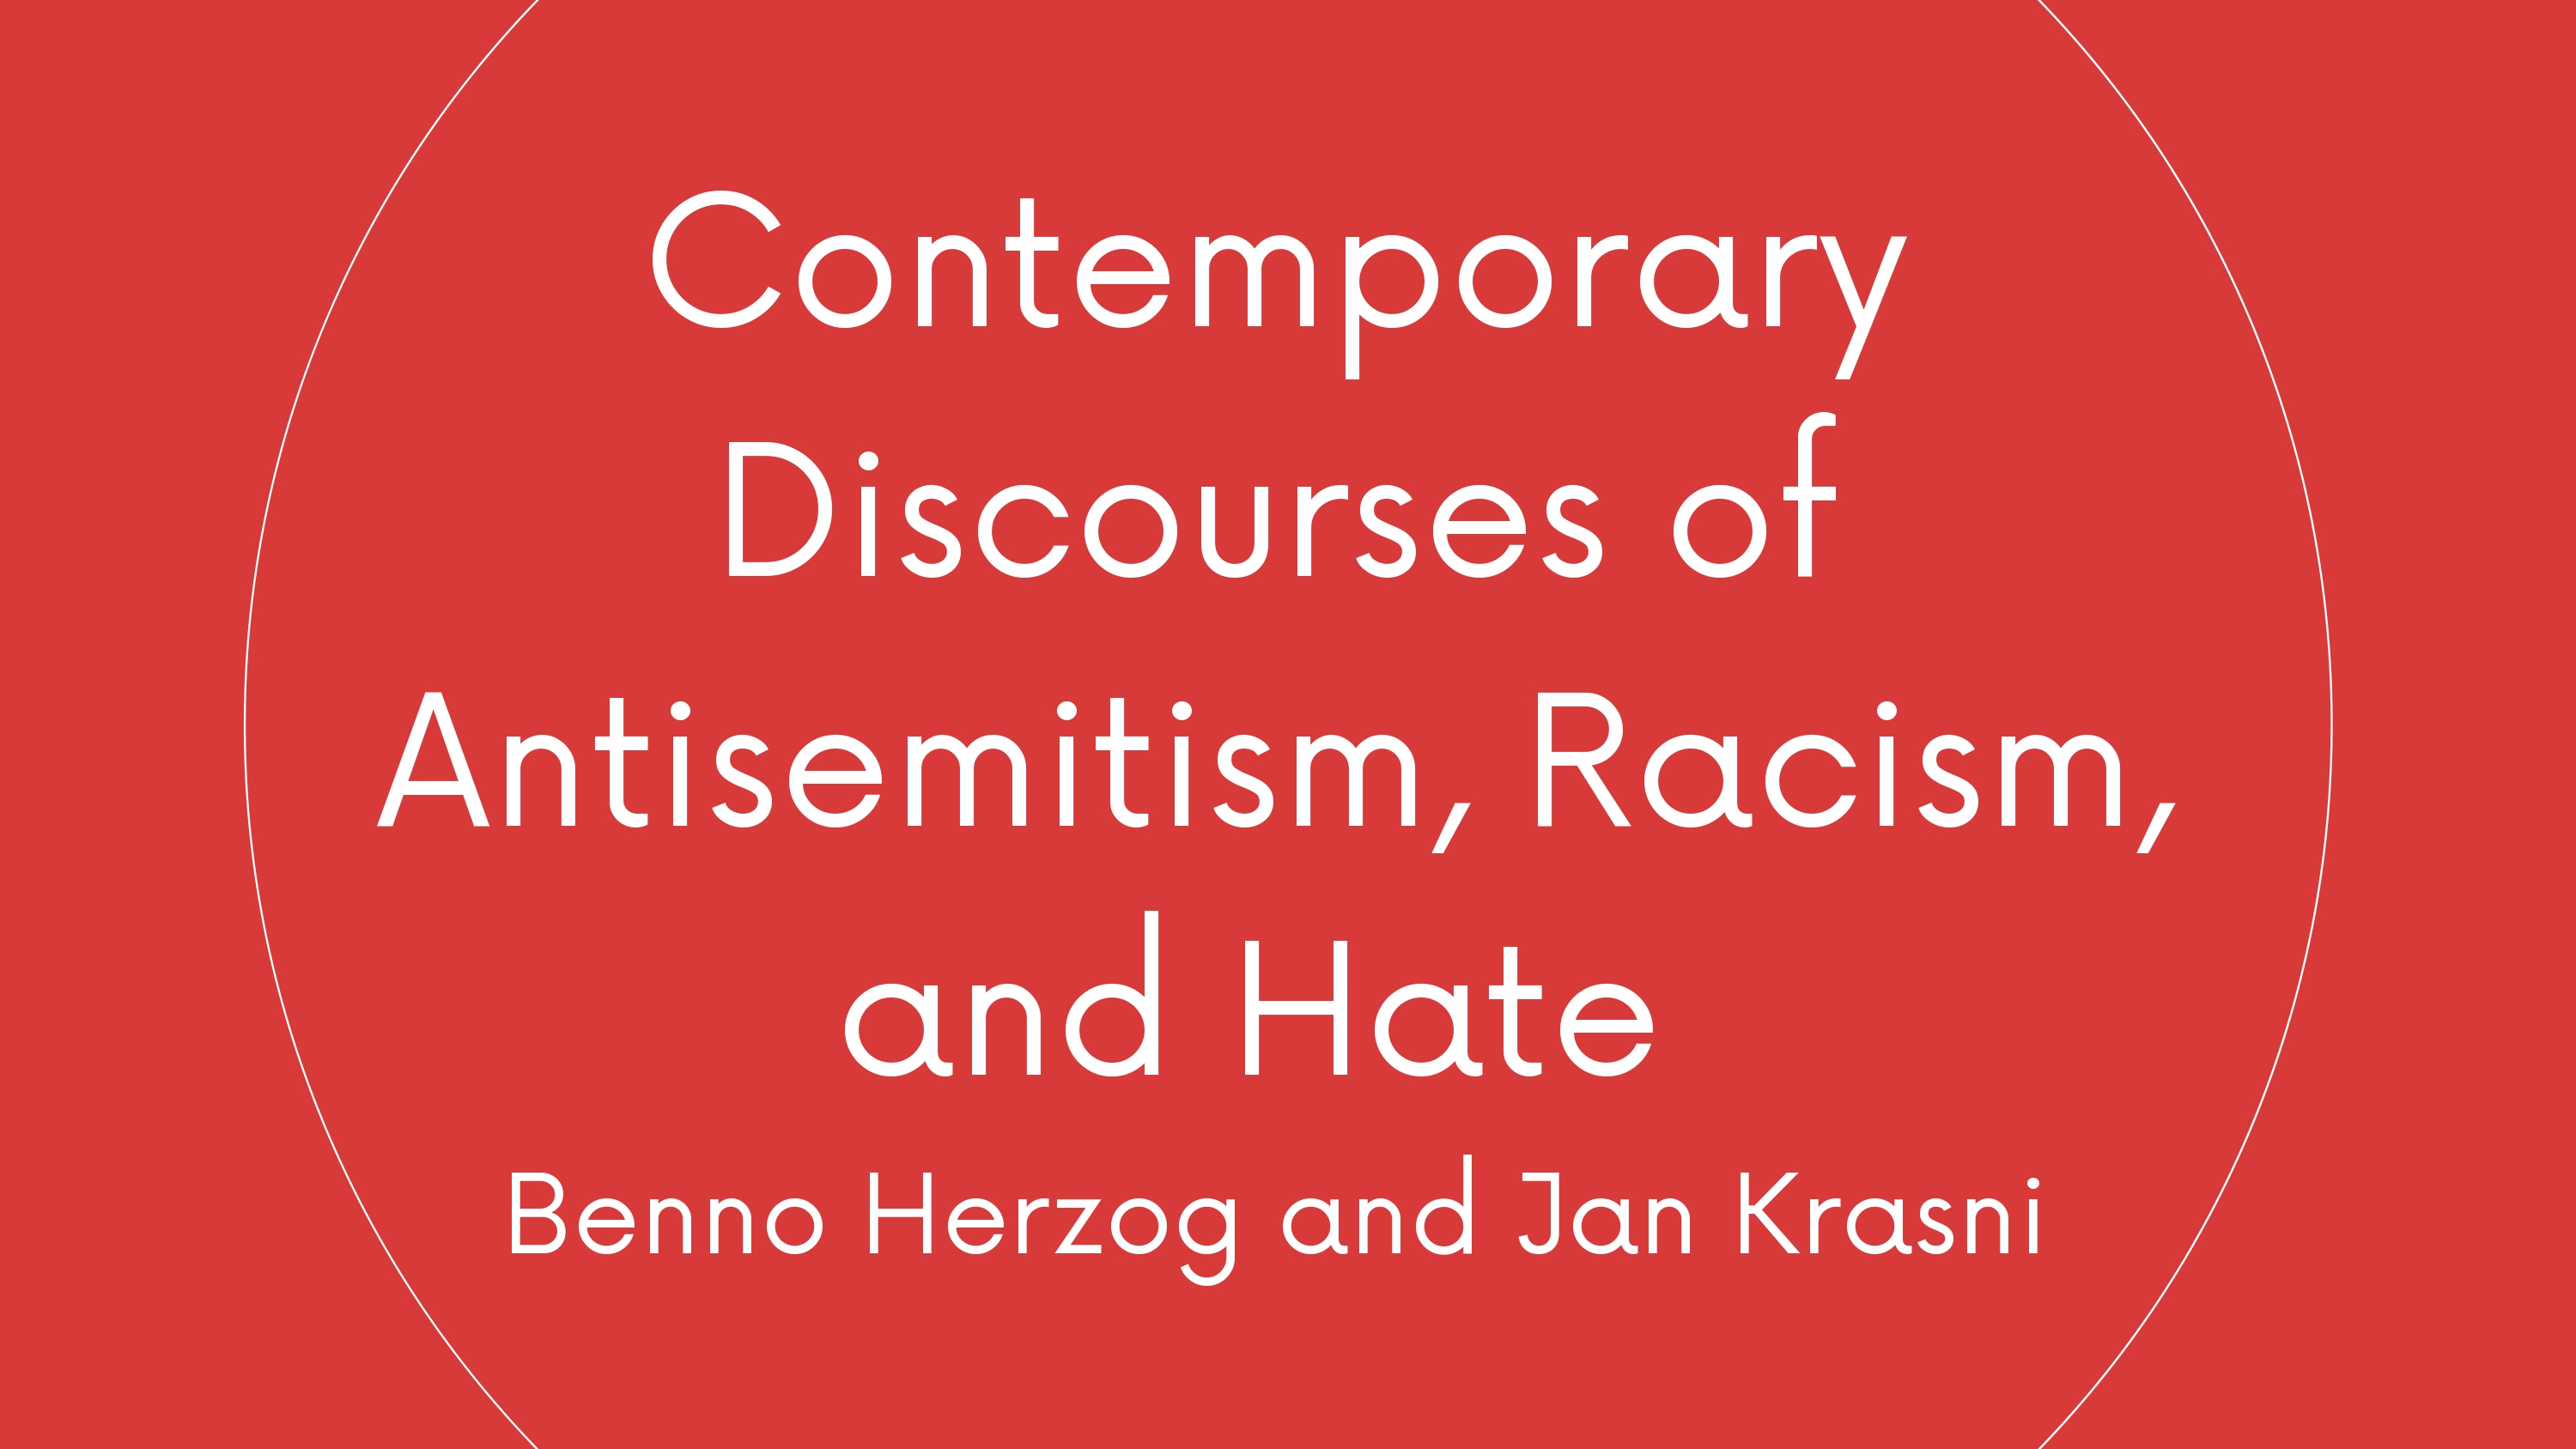 Contemporary Discourses of Antisemitism, Racism, and Hate